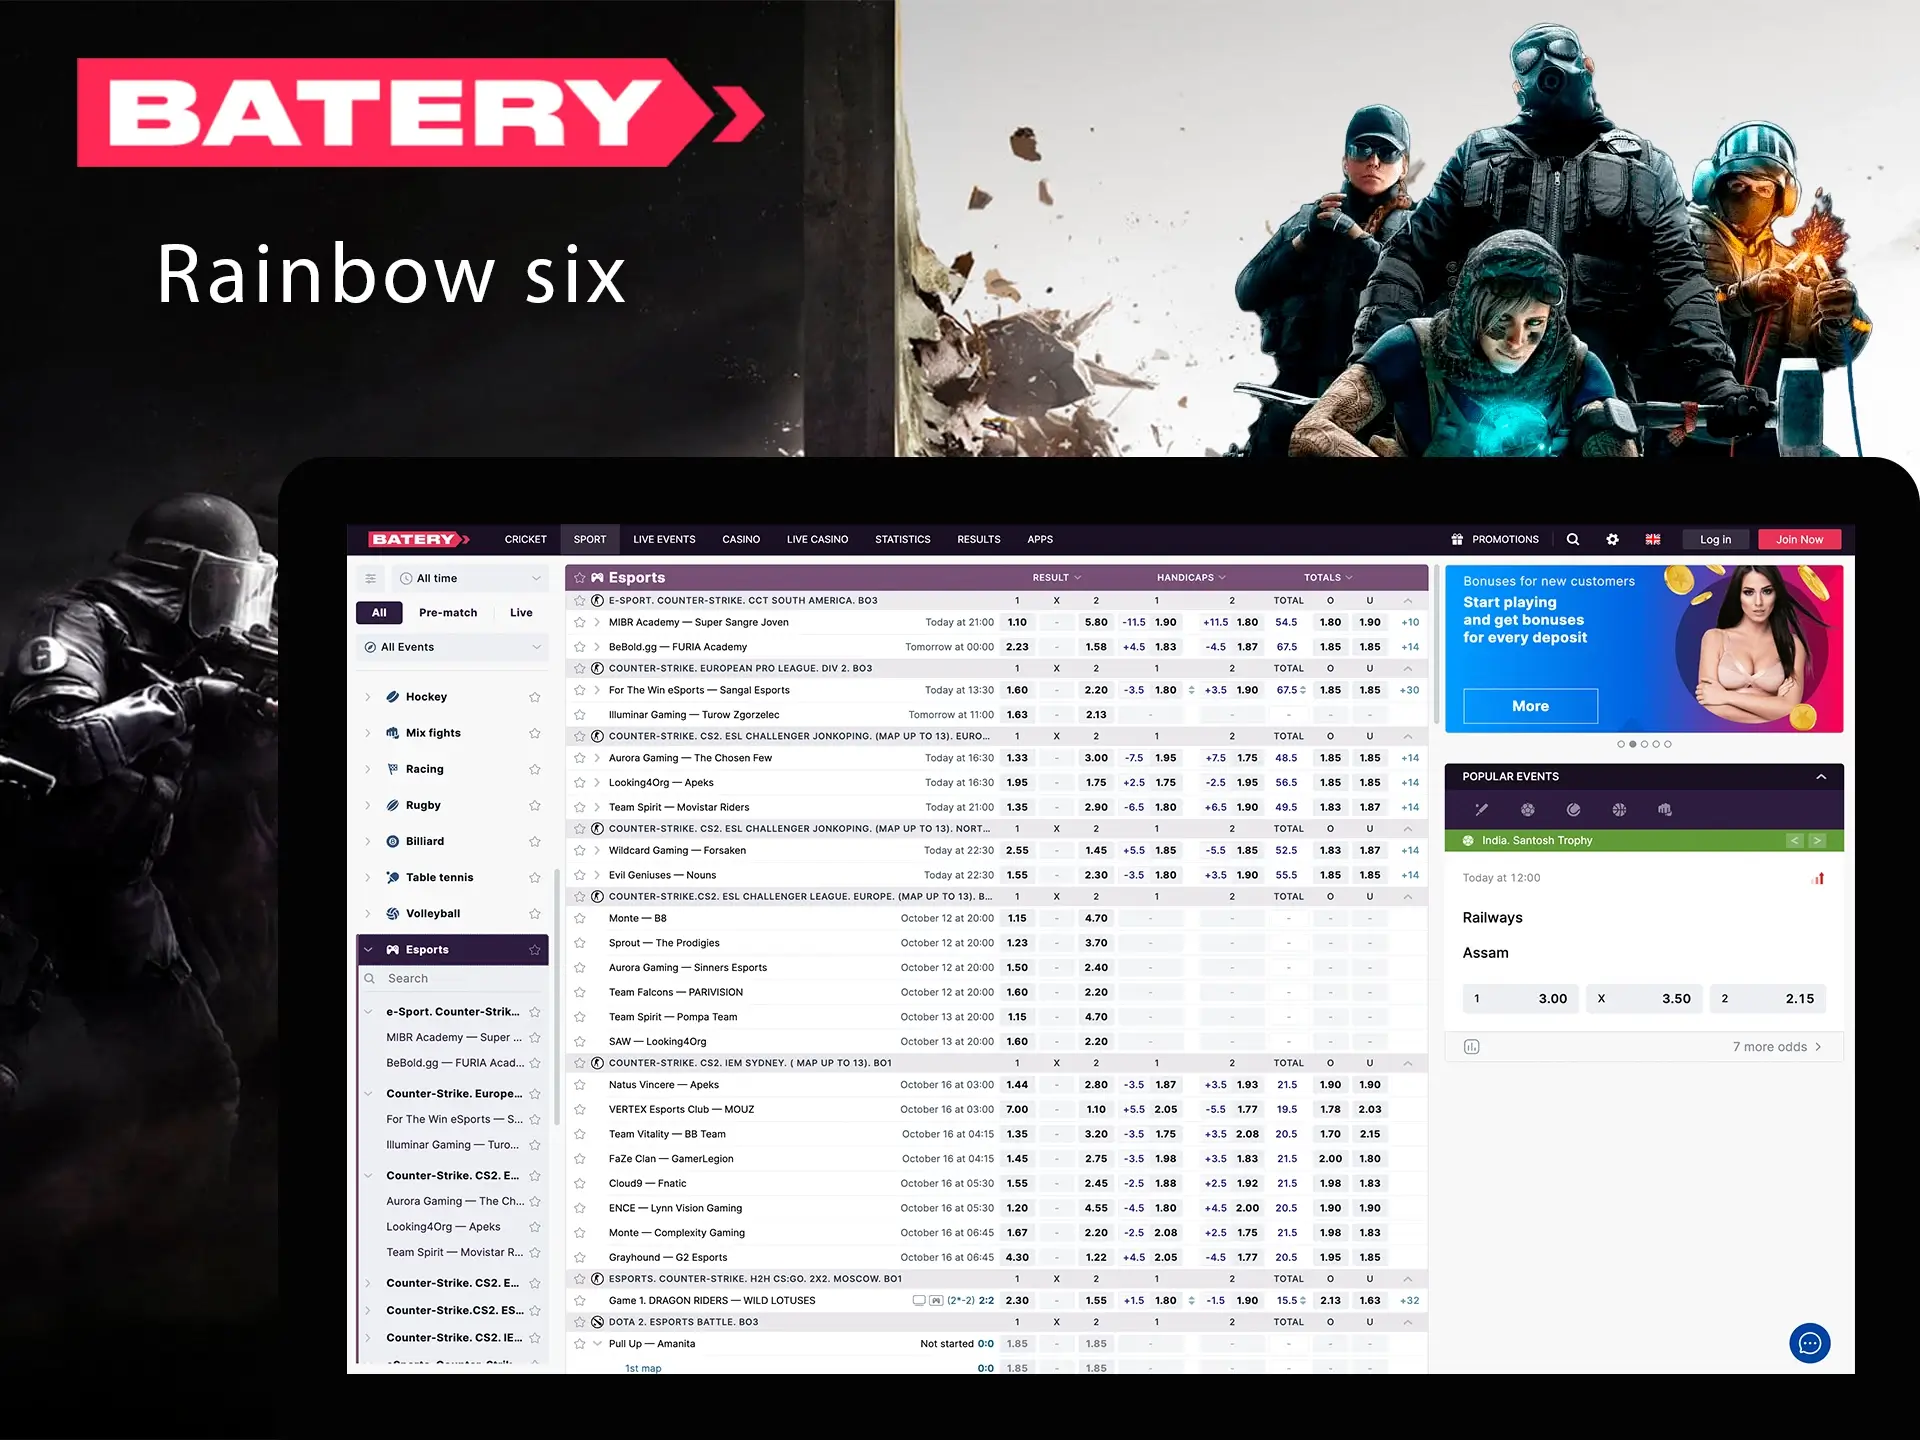 At Batery you will find a variety of bets and odds on the Rainbow six game.